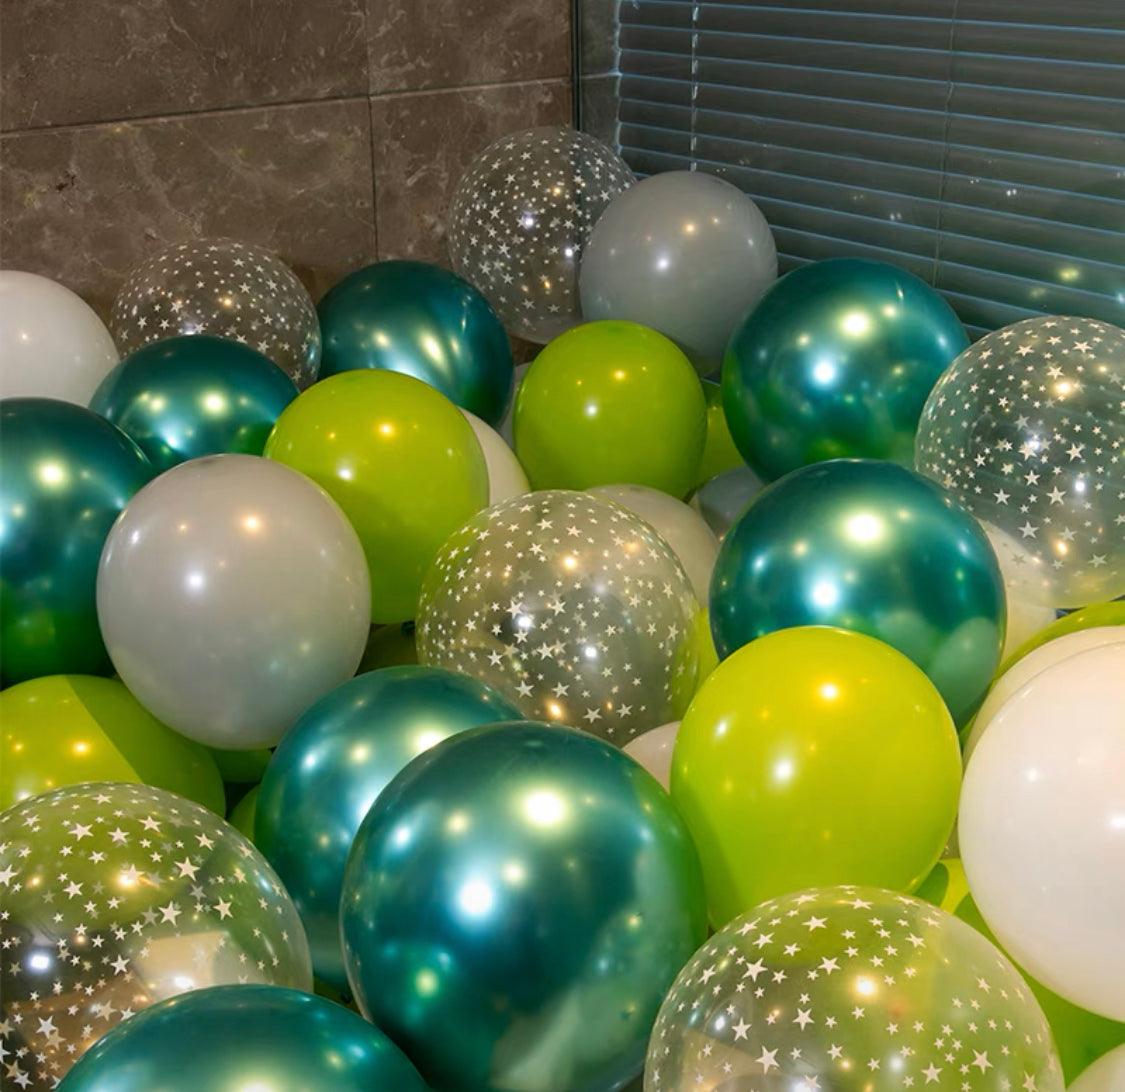 Global Shipping (50 pack) 11 inch chrome green mix with stars latex Balloons (Balloons only) - ONE UP BALLOONS